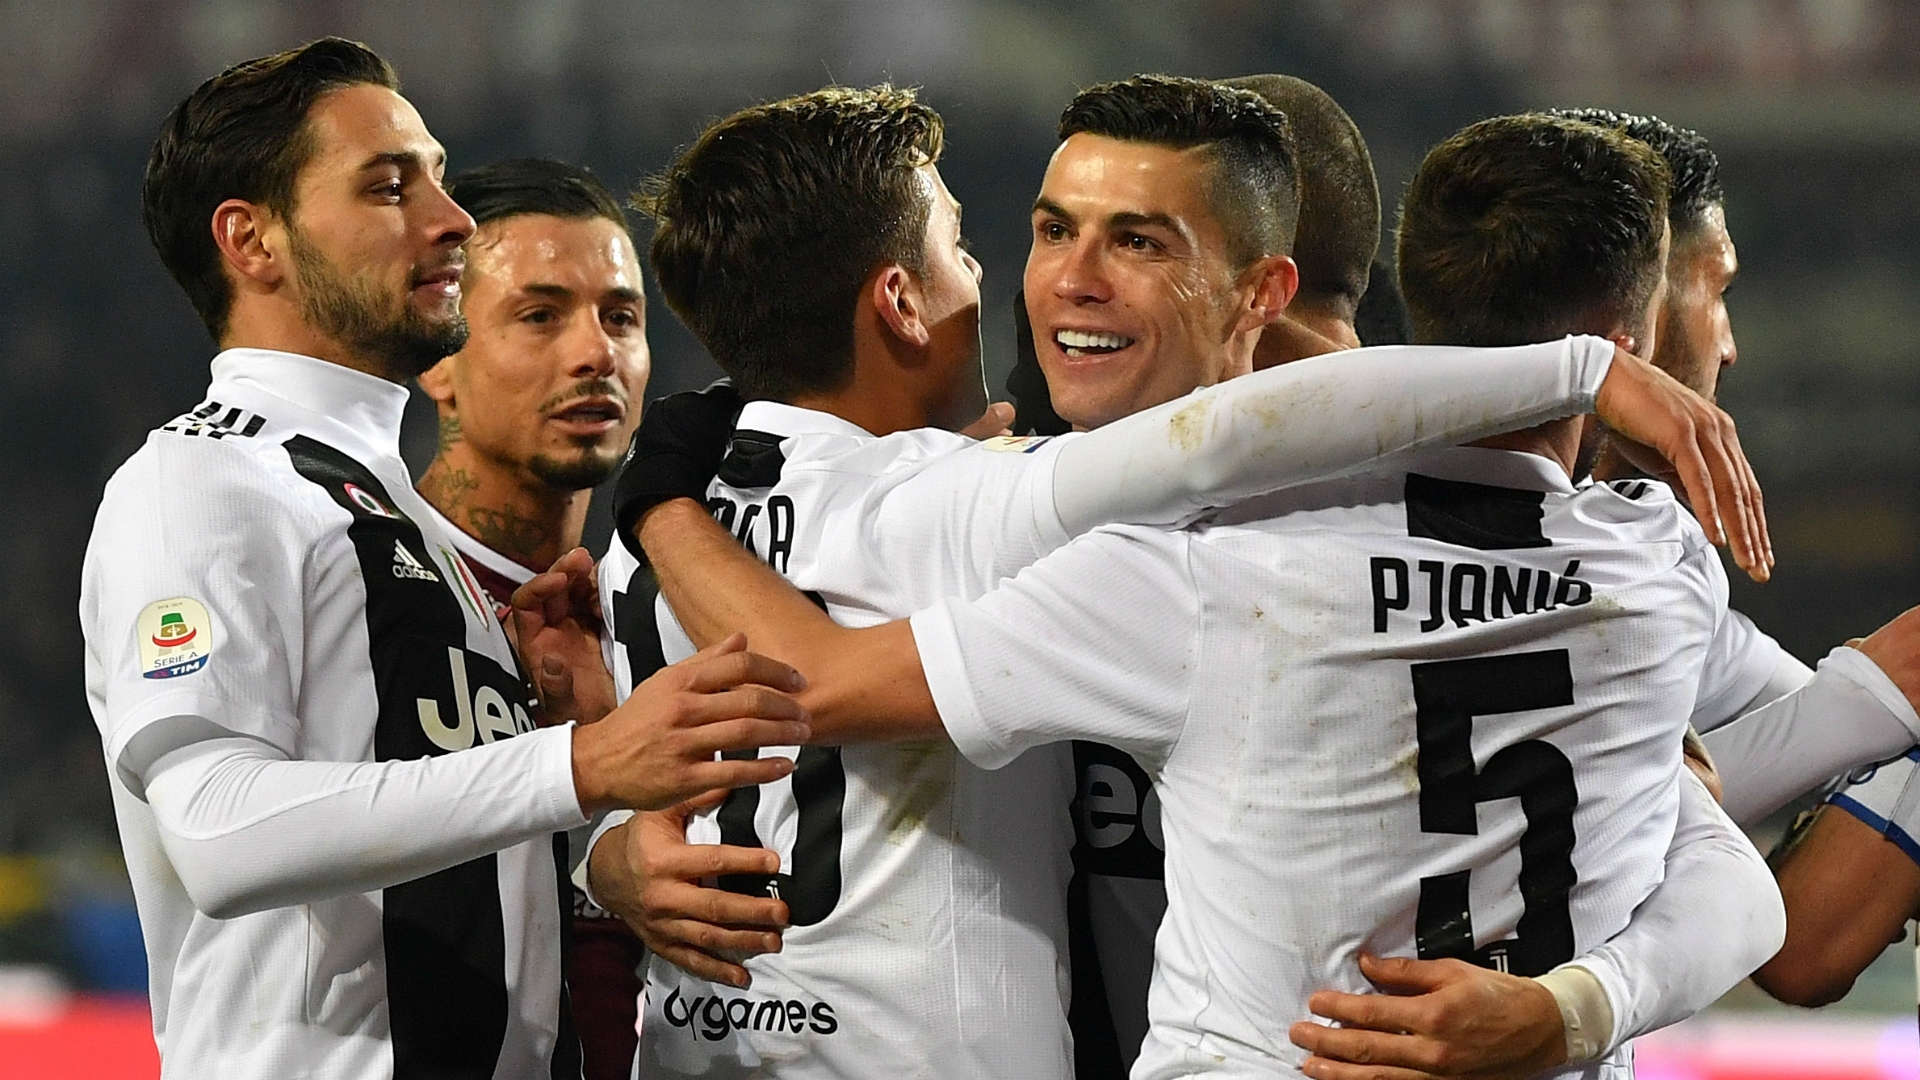 Ronaldo saves a point for Juventus, but it’s Duvan Zapata who earns top billing